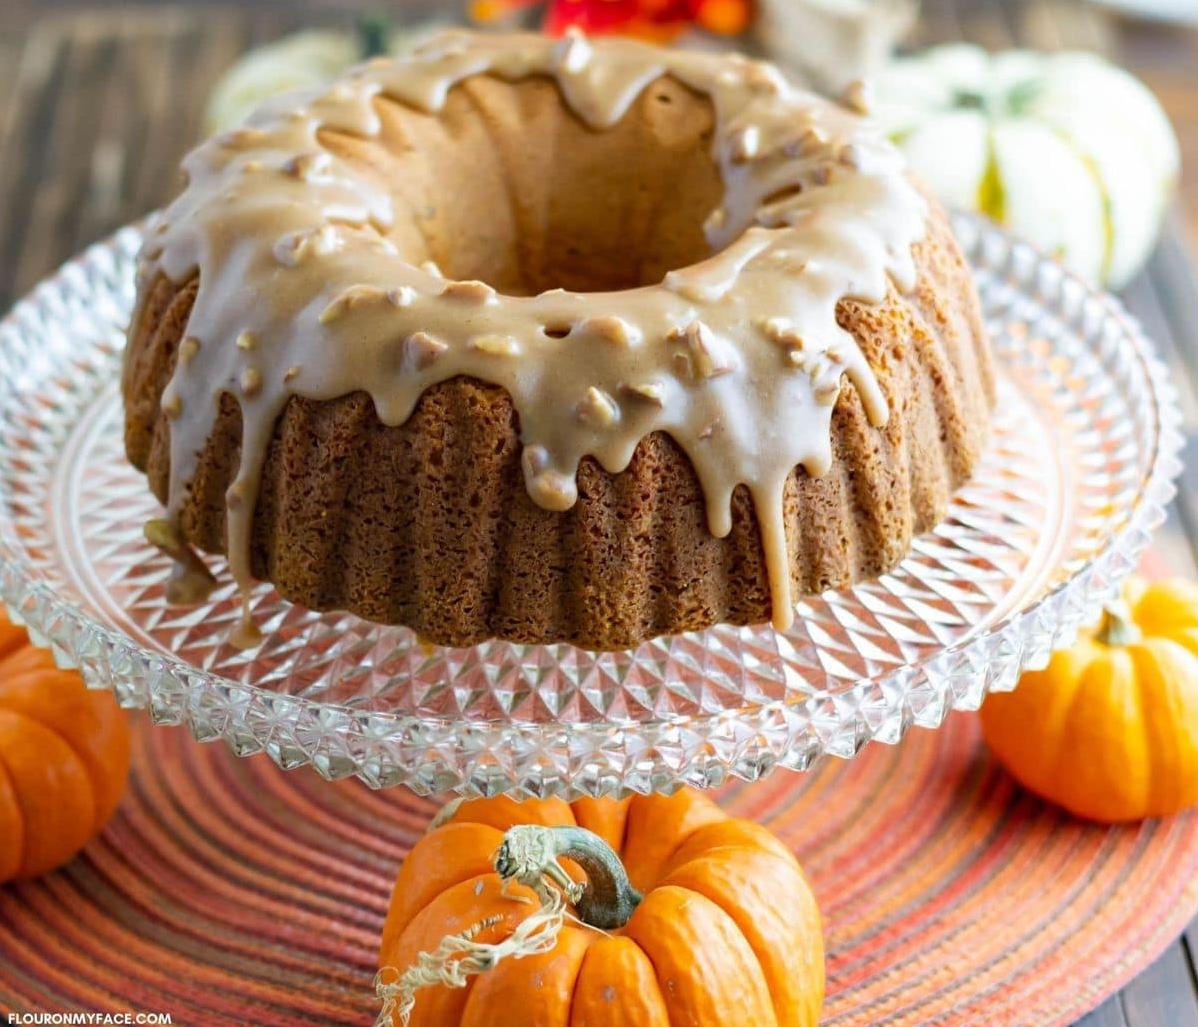  A tender crumb and crunchy pecans make this cake a masterpiece!